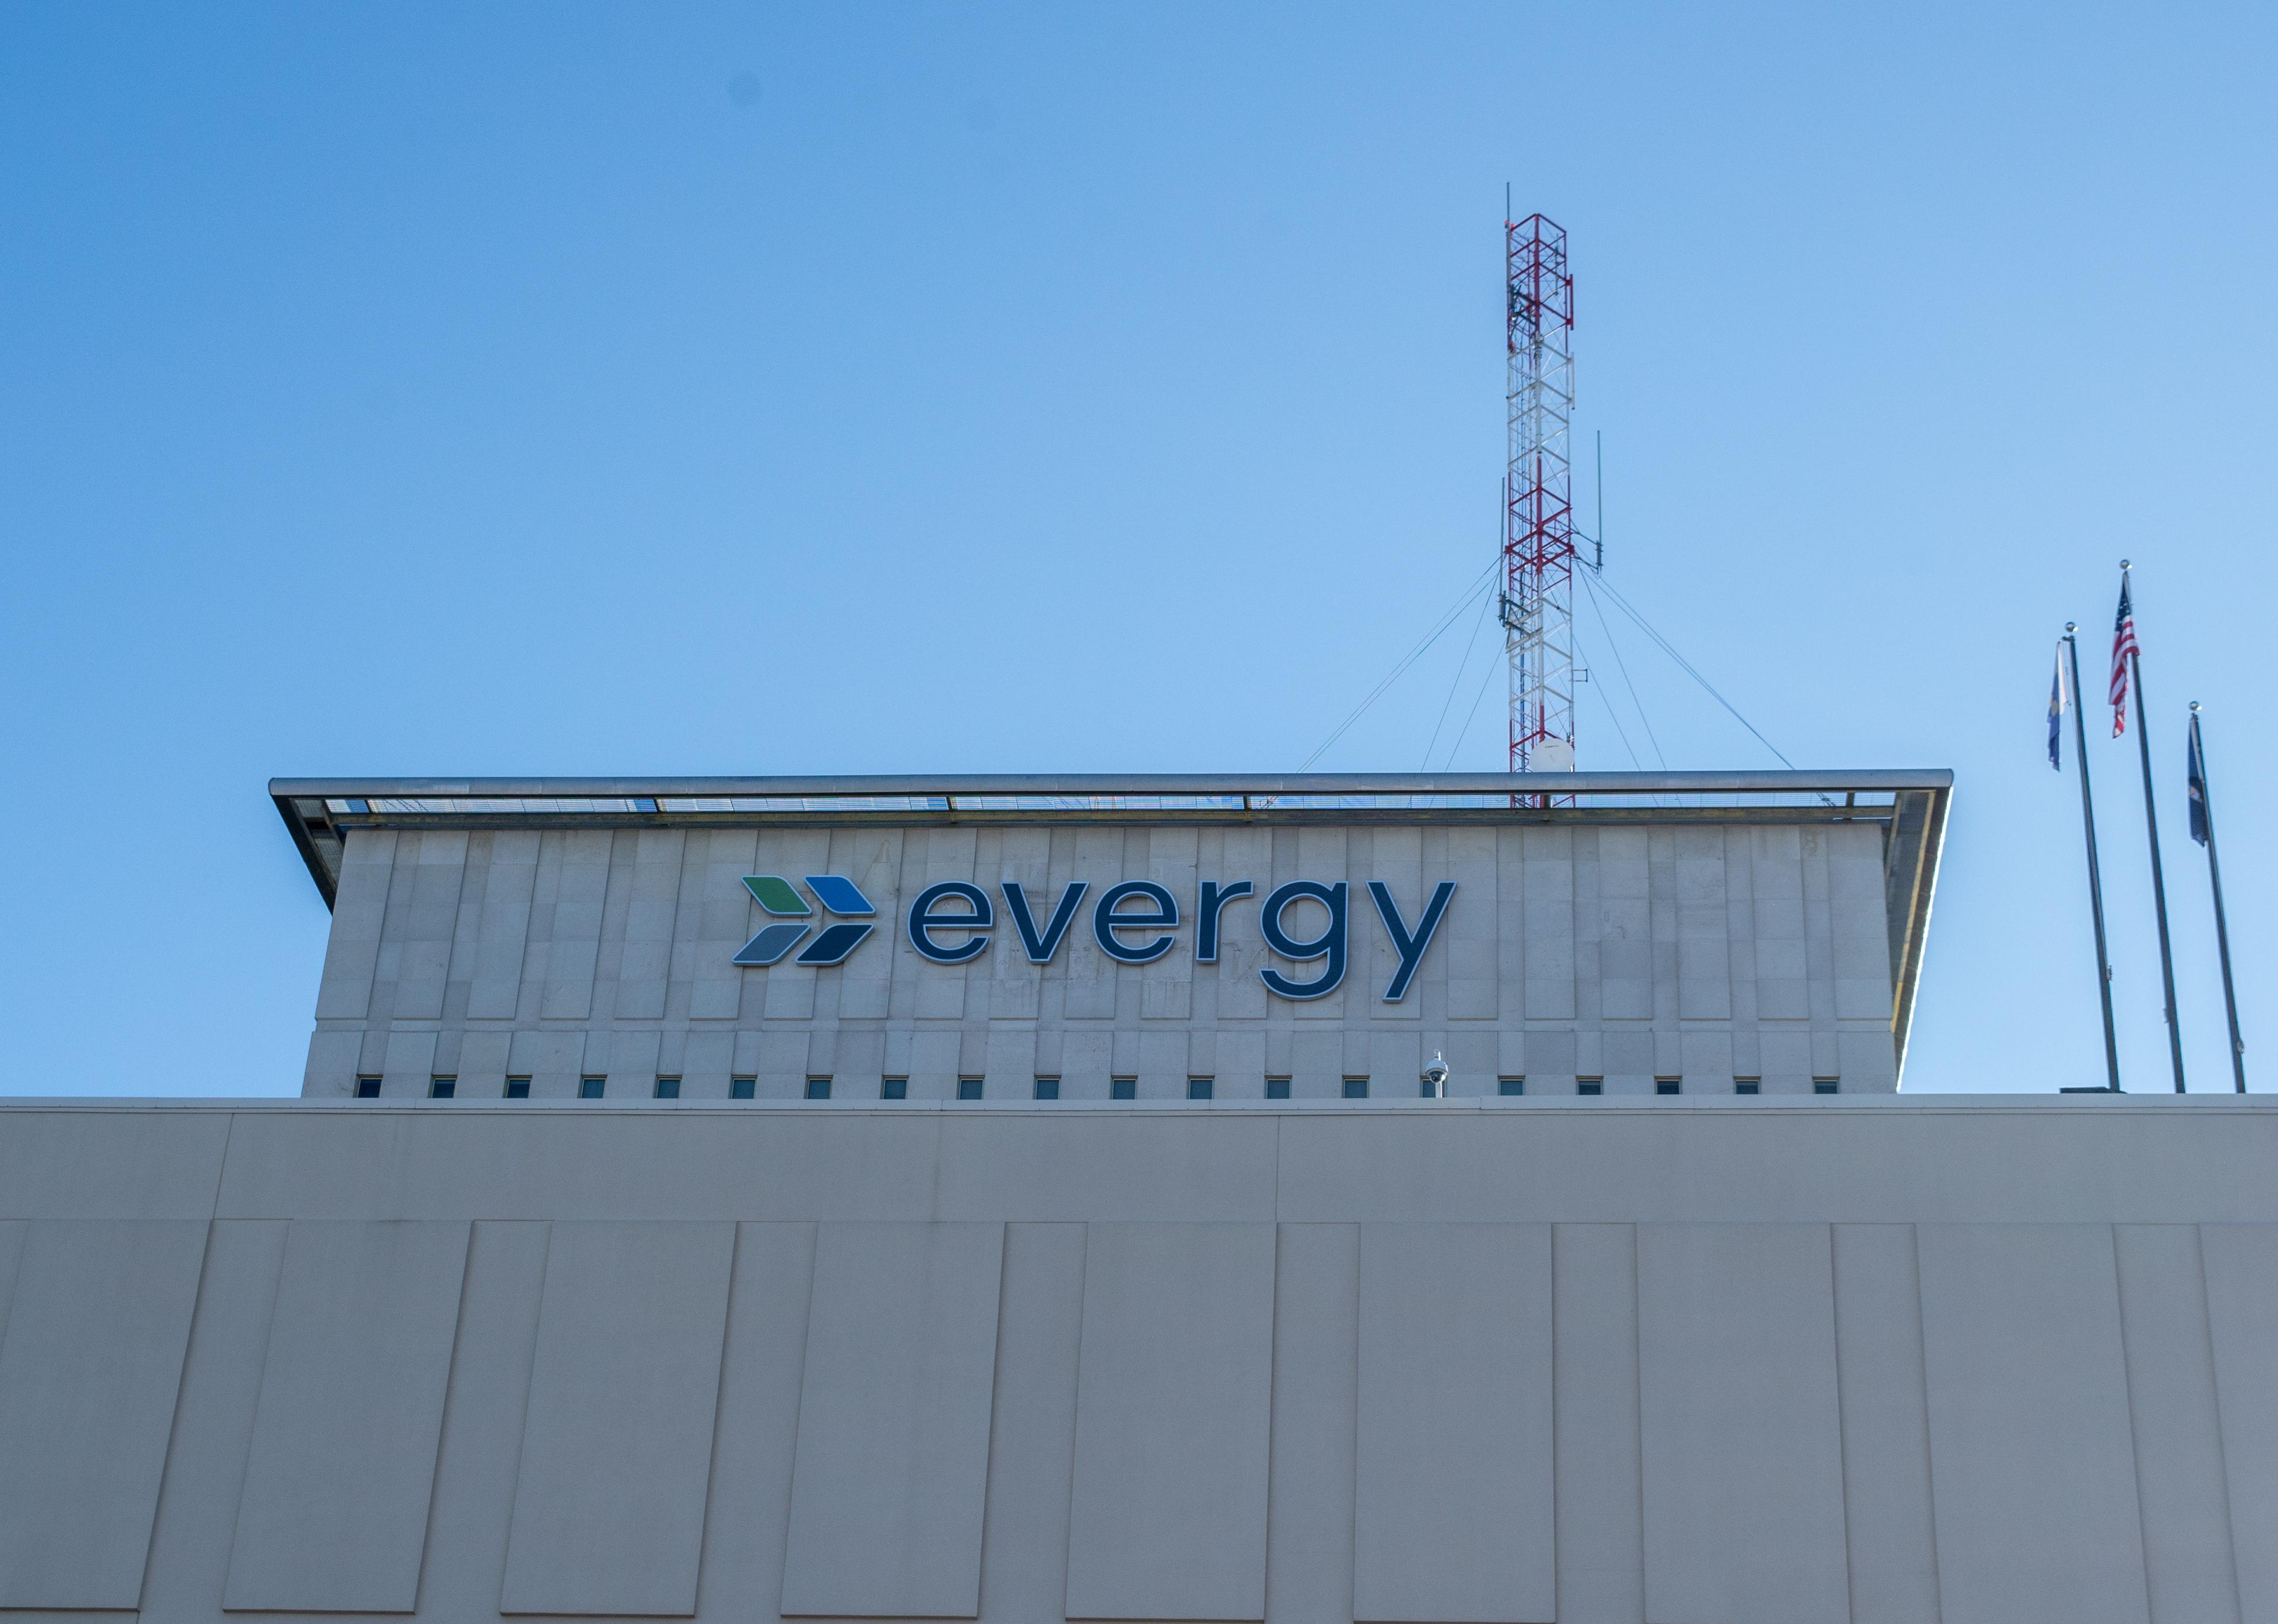 Evergy sign on the side of a building with radio antennas on top.